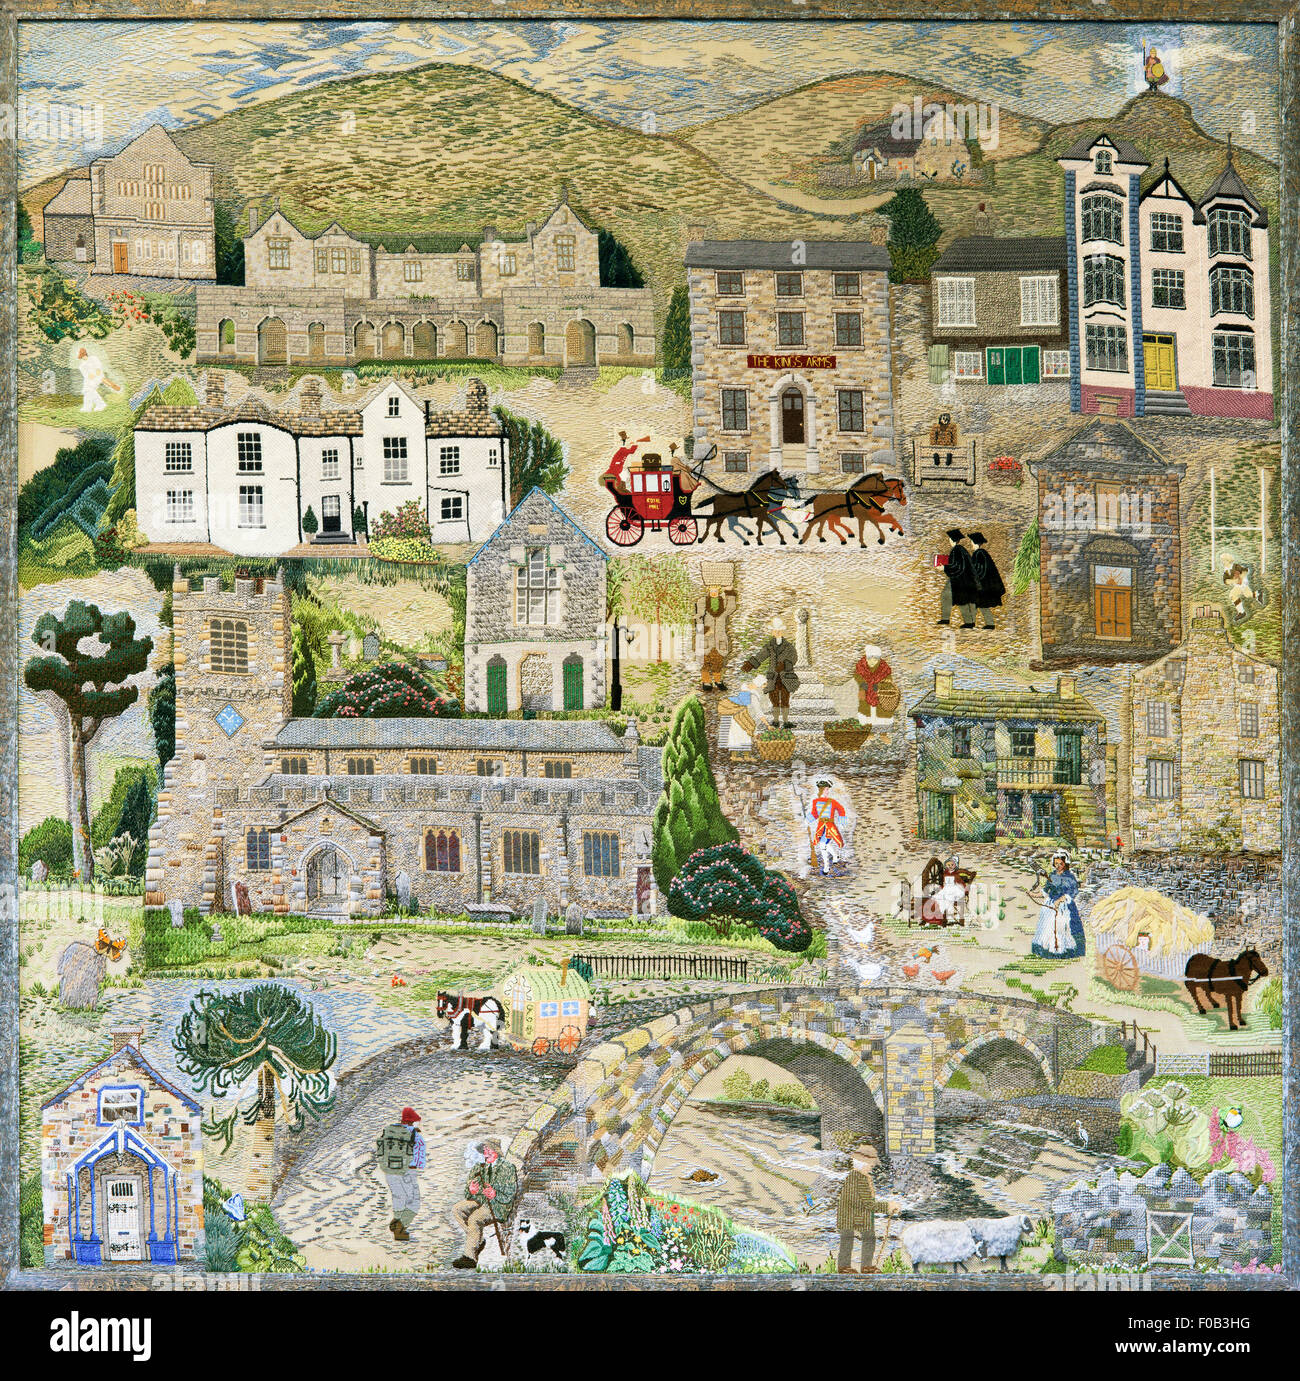 A social history of Sedbergh (first panel) embroidered on canvas, St Andrew's Church, Sedbergh, Cumbria, England, UK Stock Photo